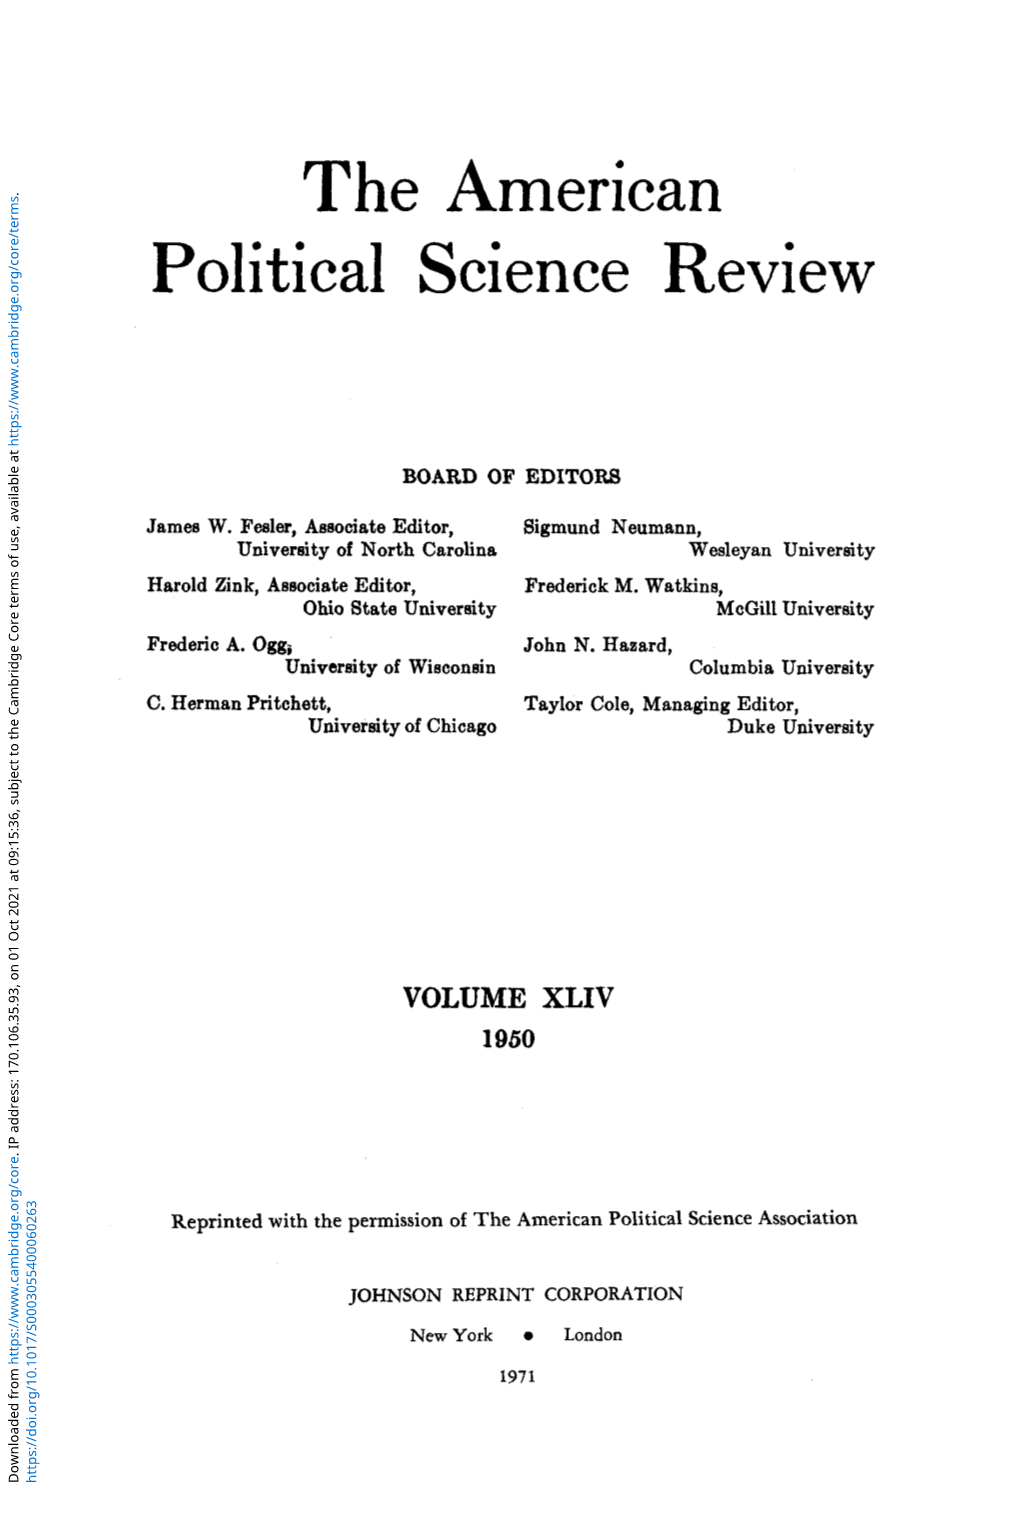 The American Political Science Review, 1926-1949